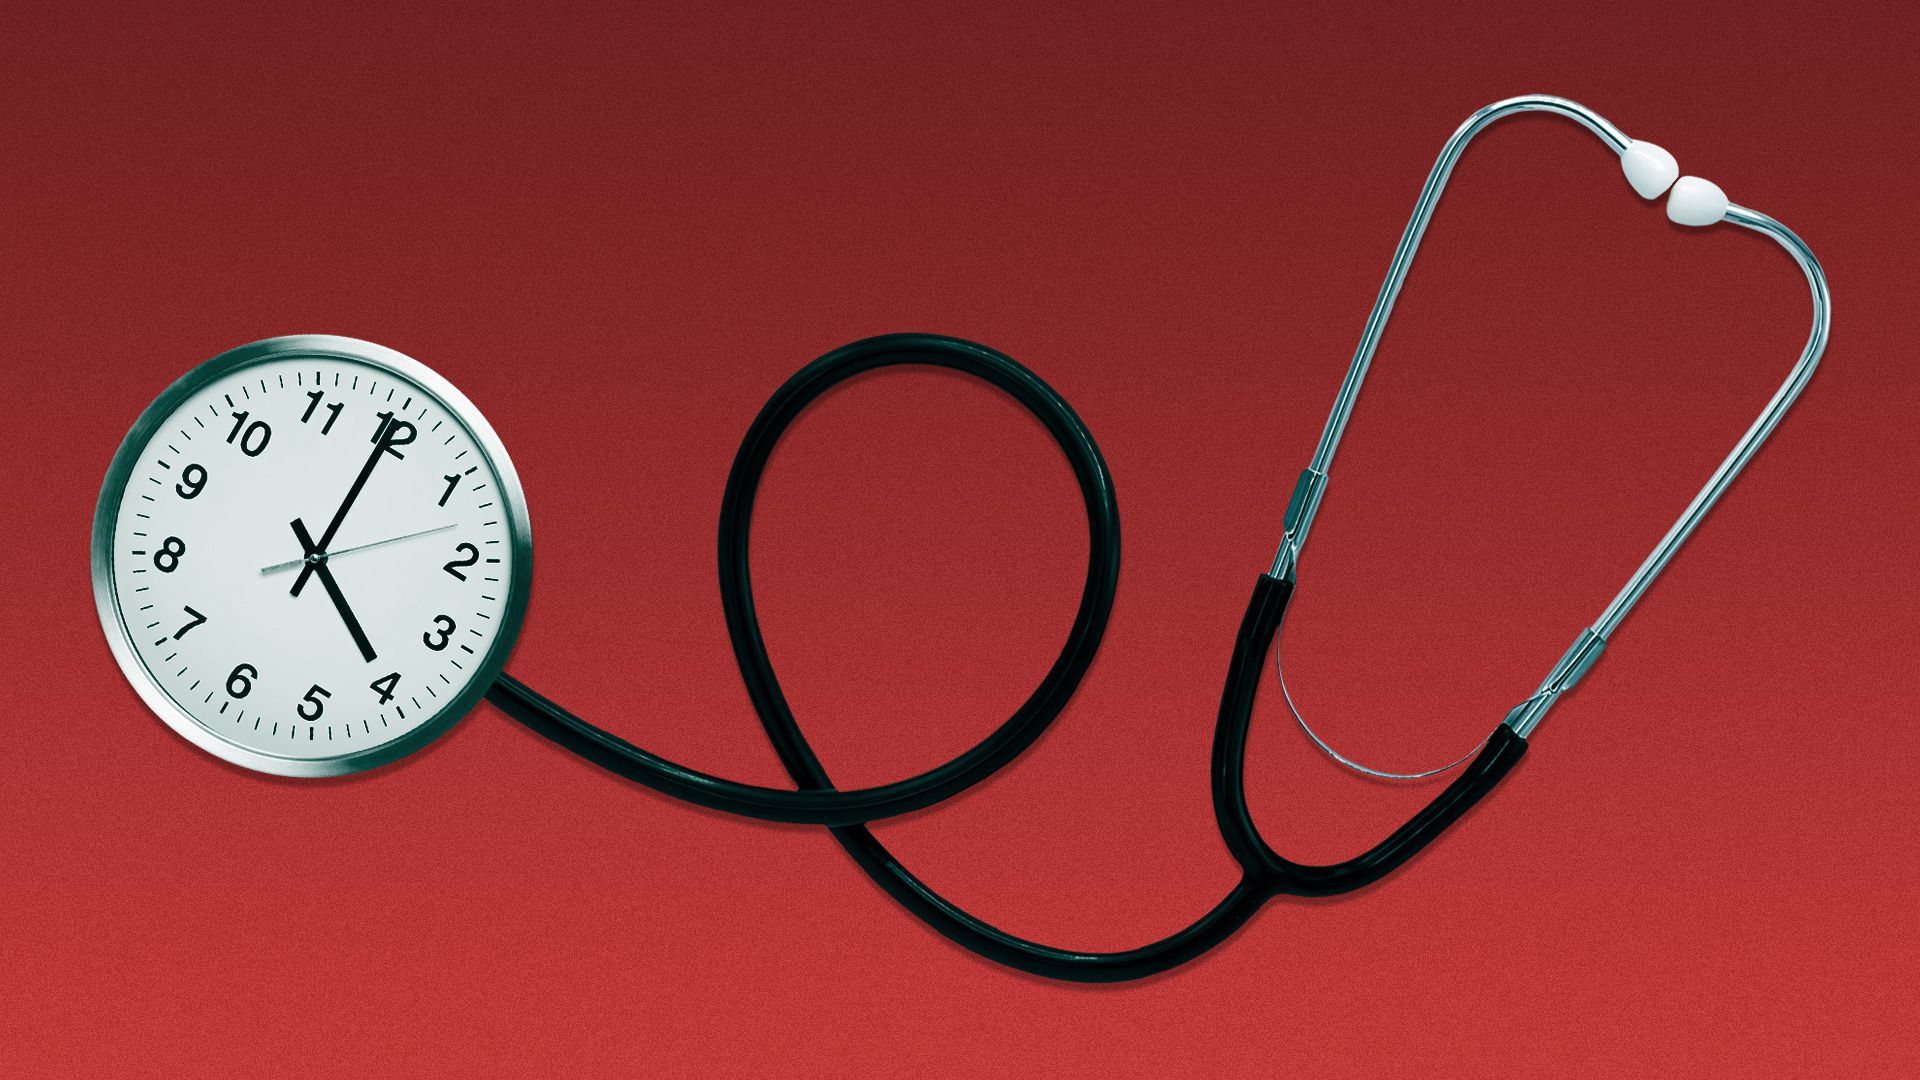 Illustration of a stethoscope with a clock attached.